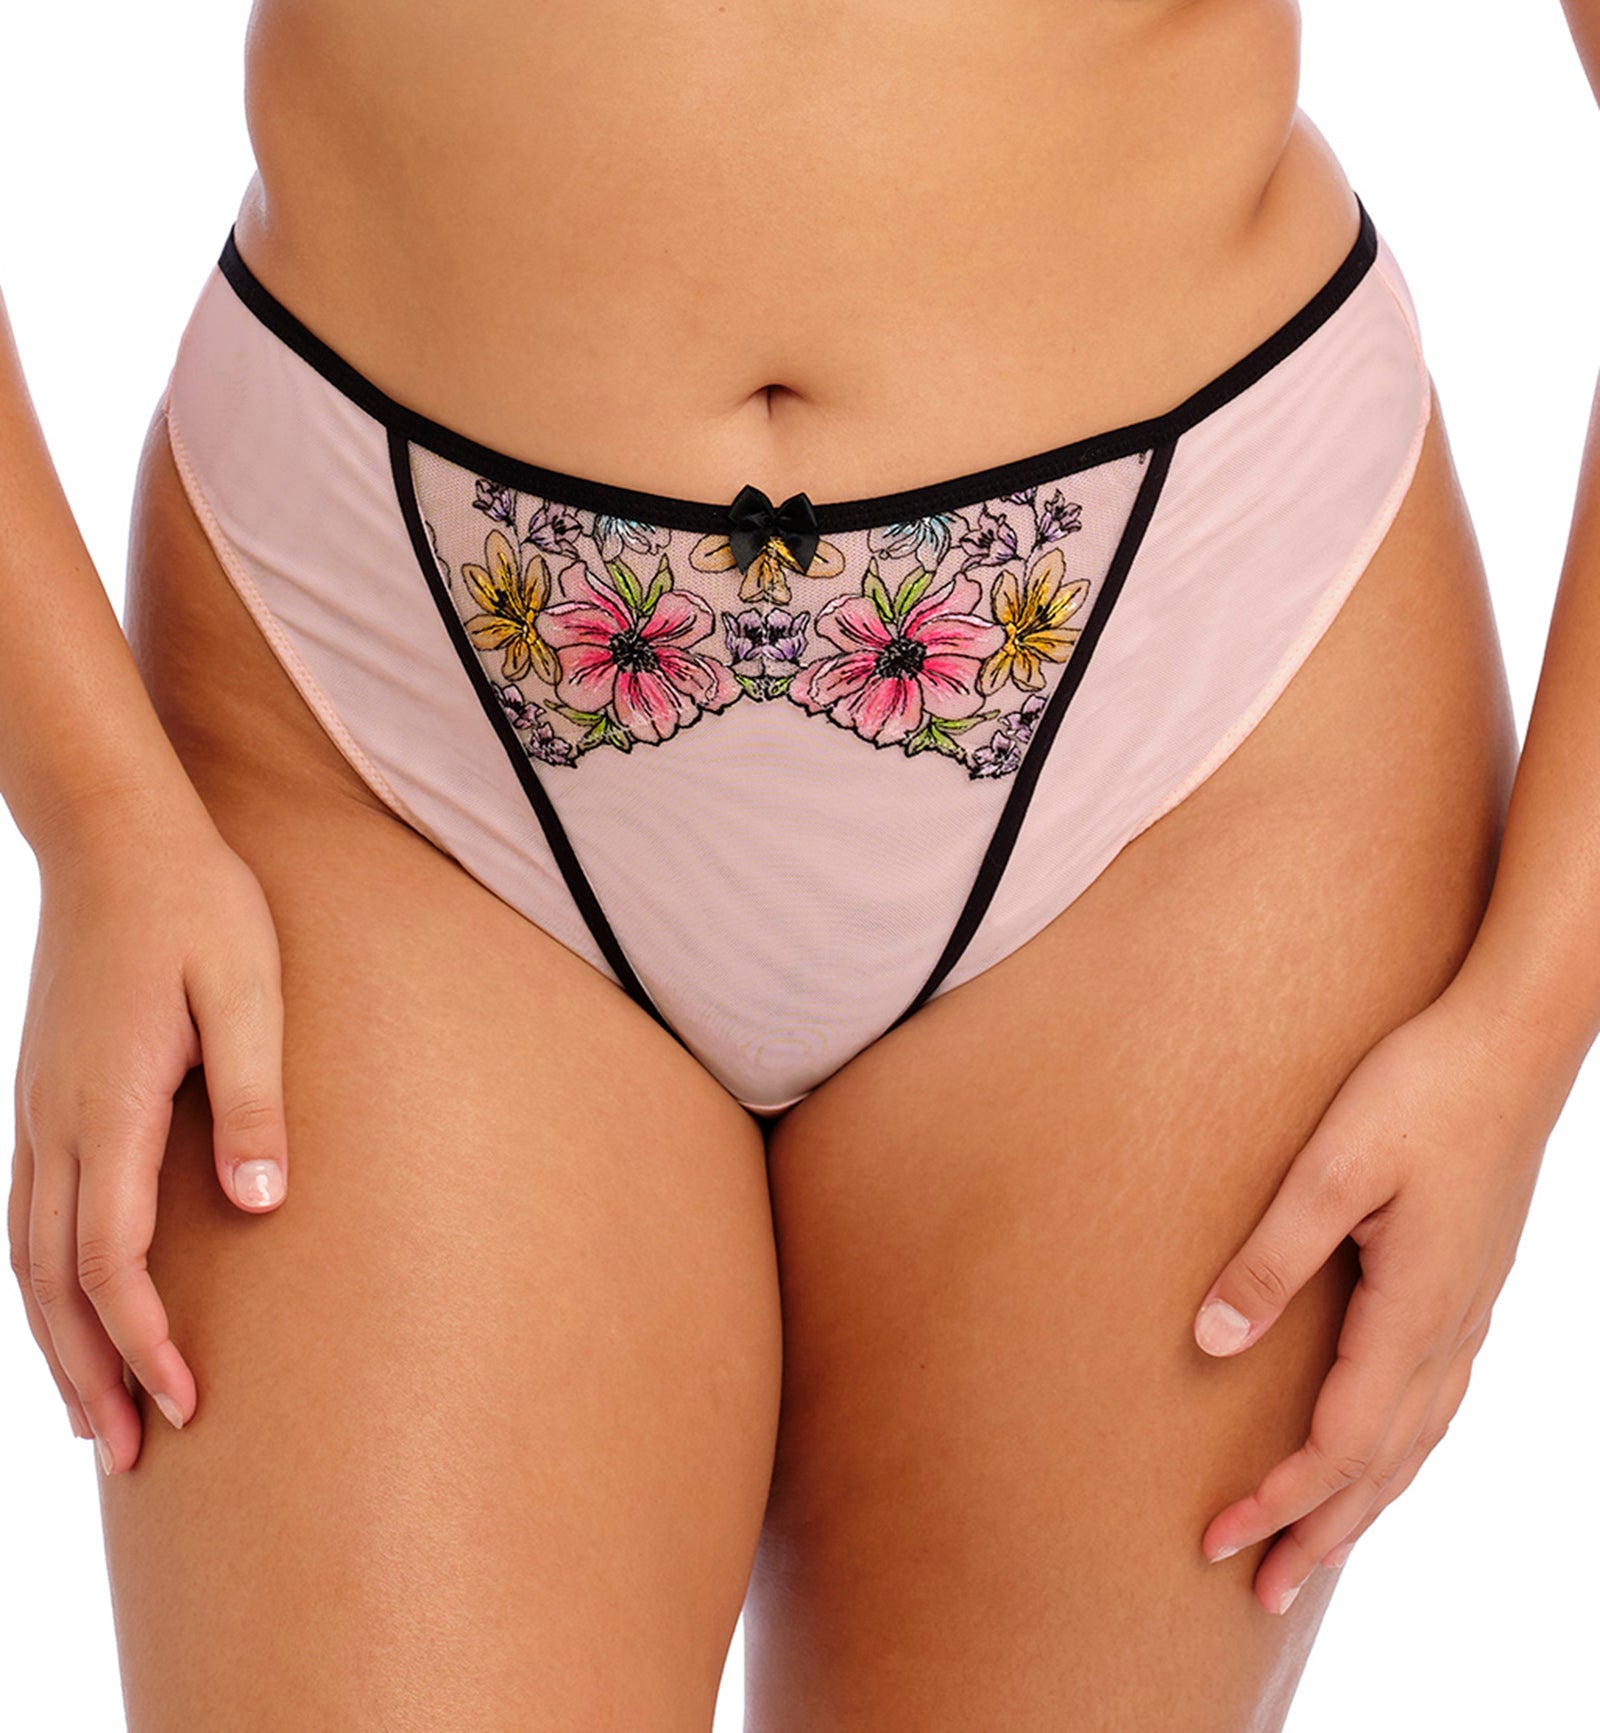 Elomi Carrie Matching Thong (301870),Small,Ballet Pink - Ballet Pink,Small